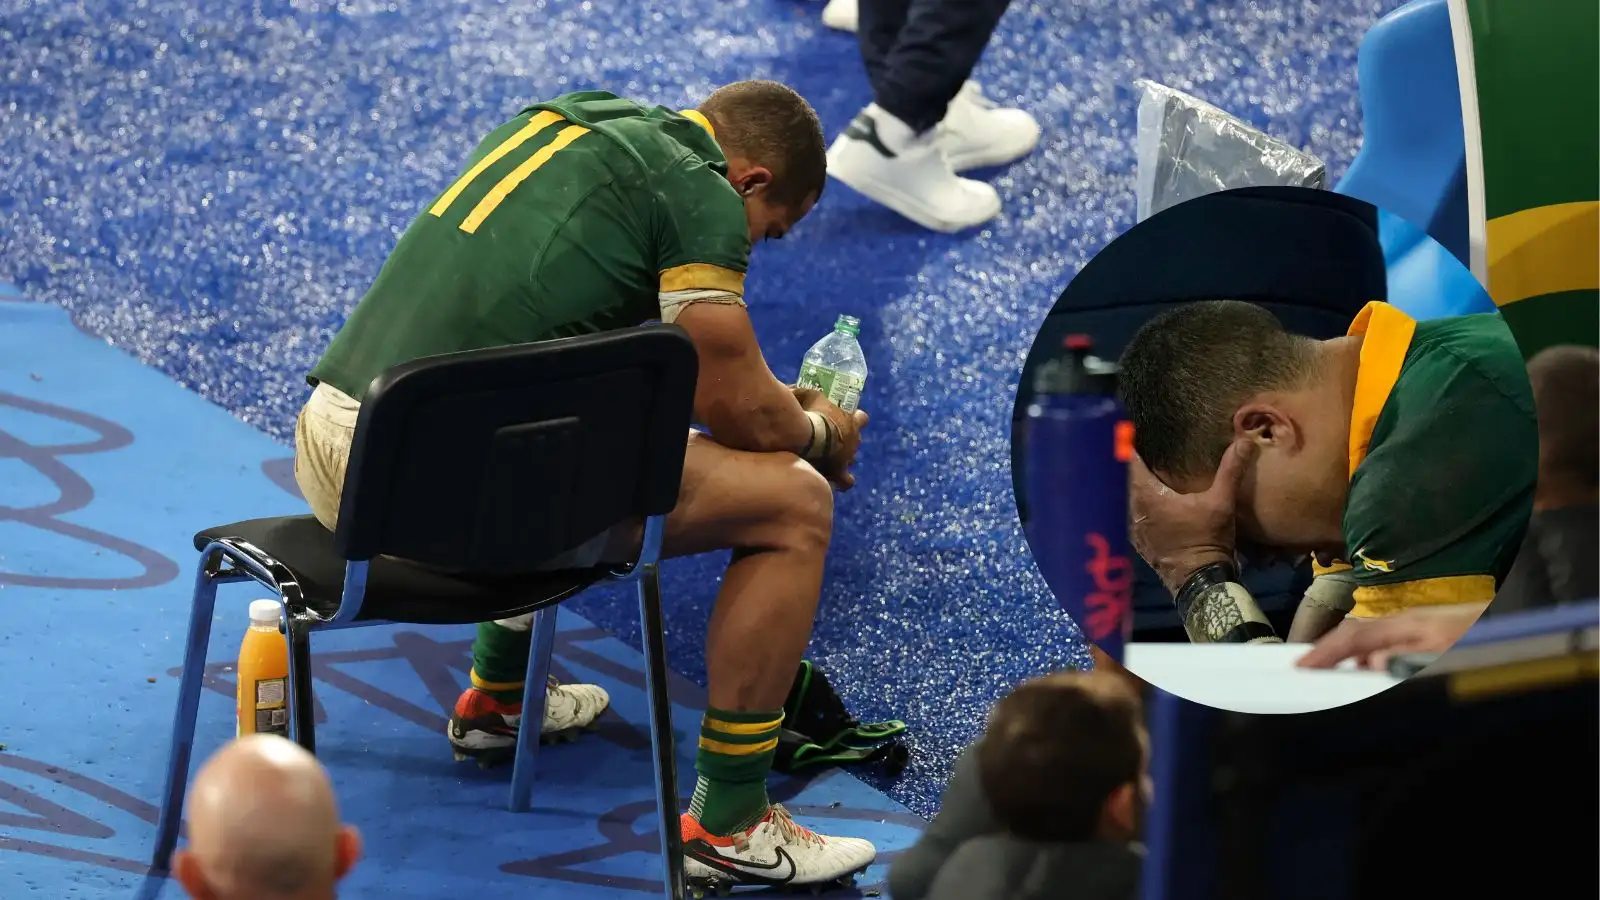 Springboks' Cheslin Kolbe reacts in the sin bin after being shown a yellow card during the Rugby World Cup final match between New Zealand and South Africa at the Stade de France in Saint-Denis